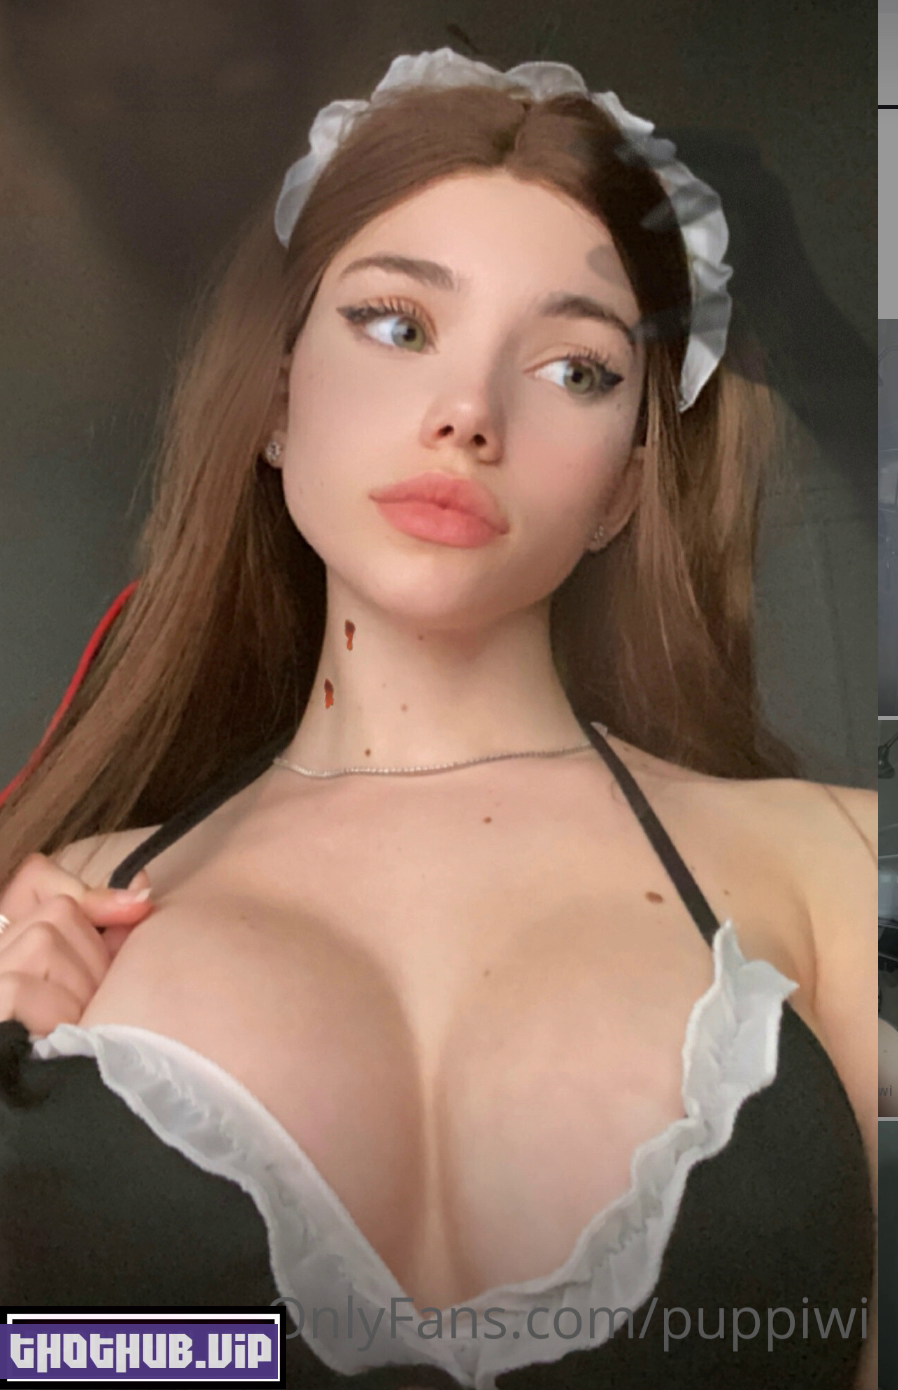 1706553697 600 Puppiwii %E2%80%93 Cute Petite Onlyfans Nudes